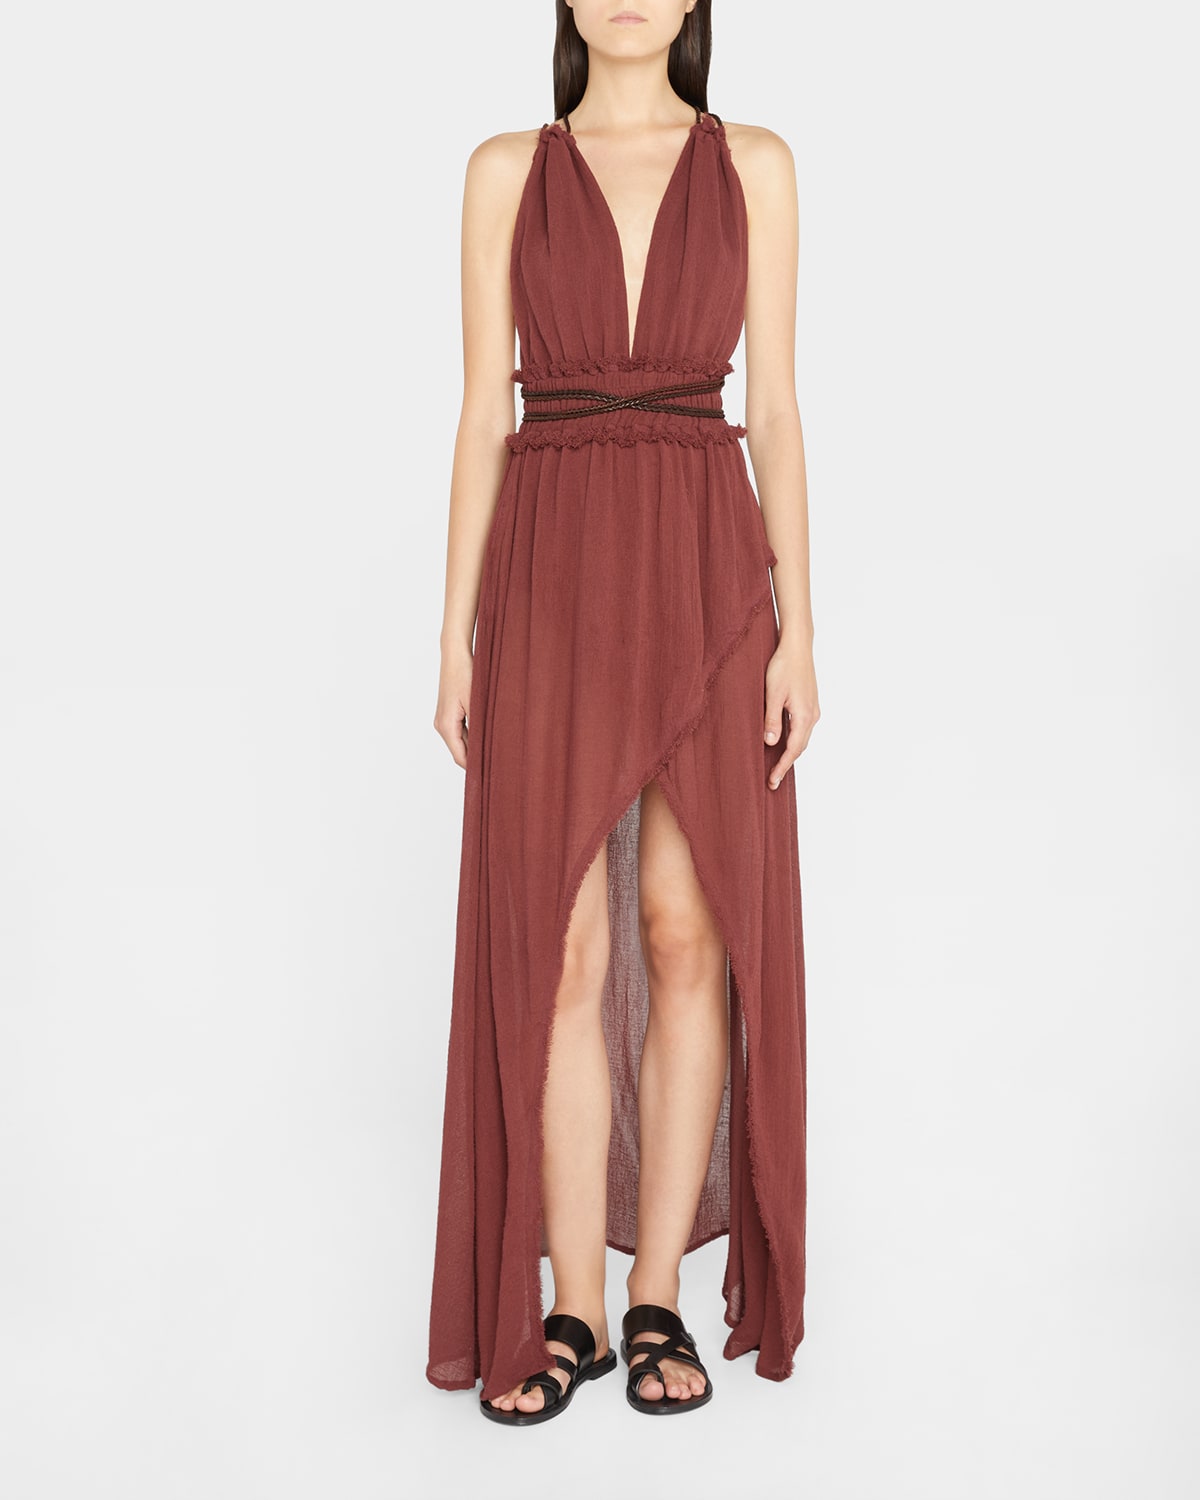 CARAVANA Alak Plunging V-Neck Maxi Dress with Calf Leather Accents